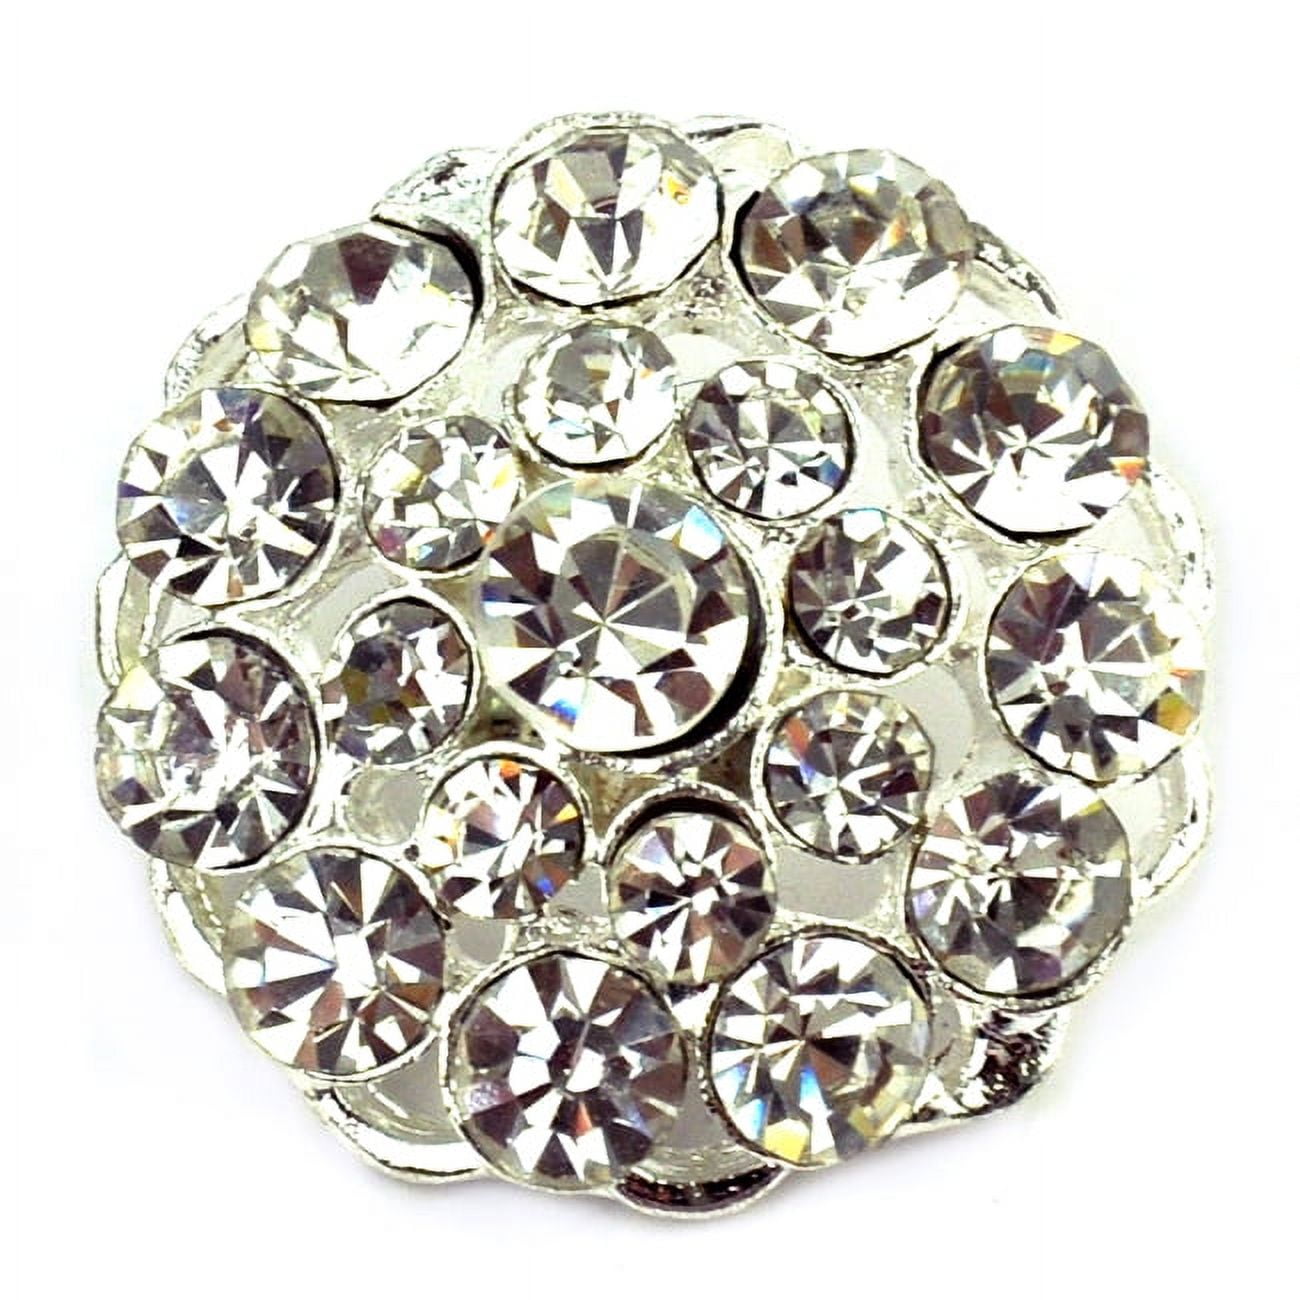 20PC Assorted Color Acrylic Rhinestone Buttons with Shank 13~26mm